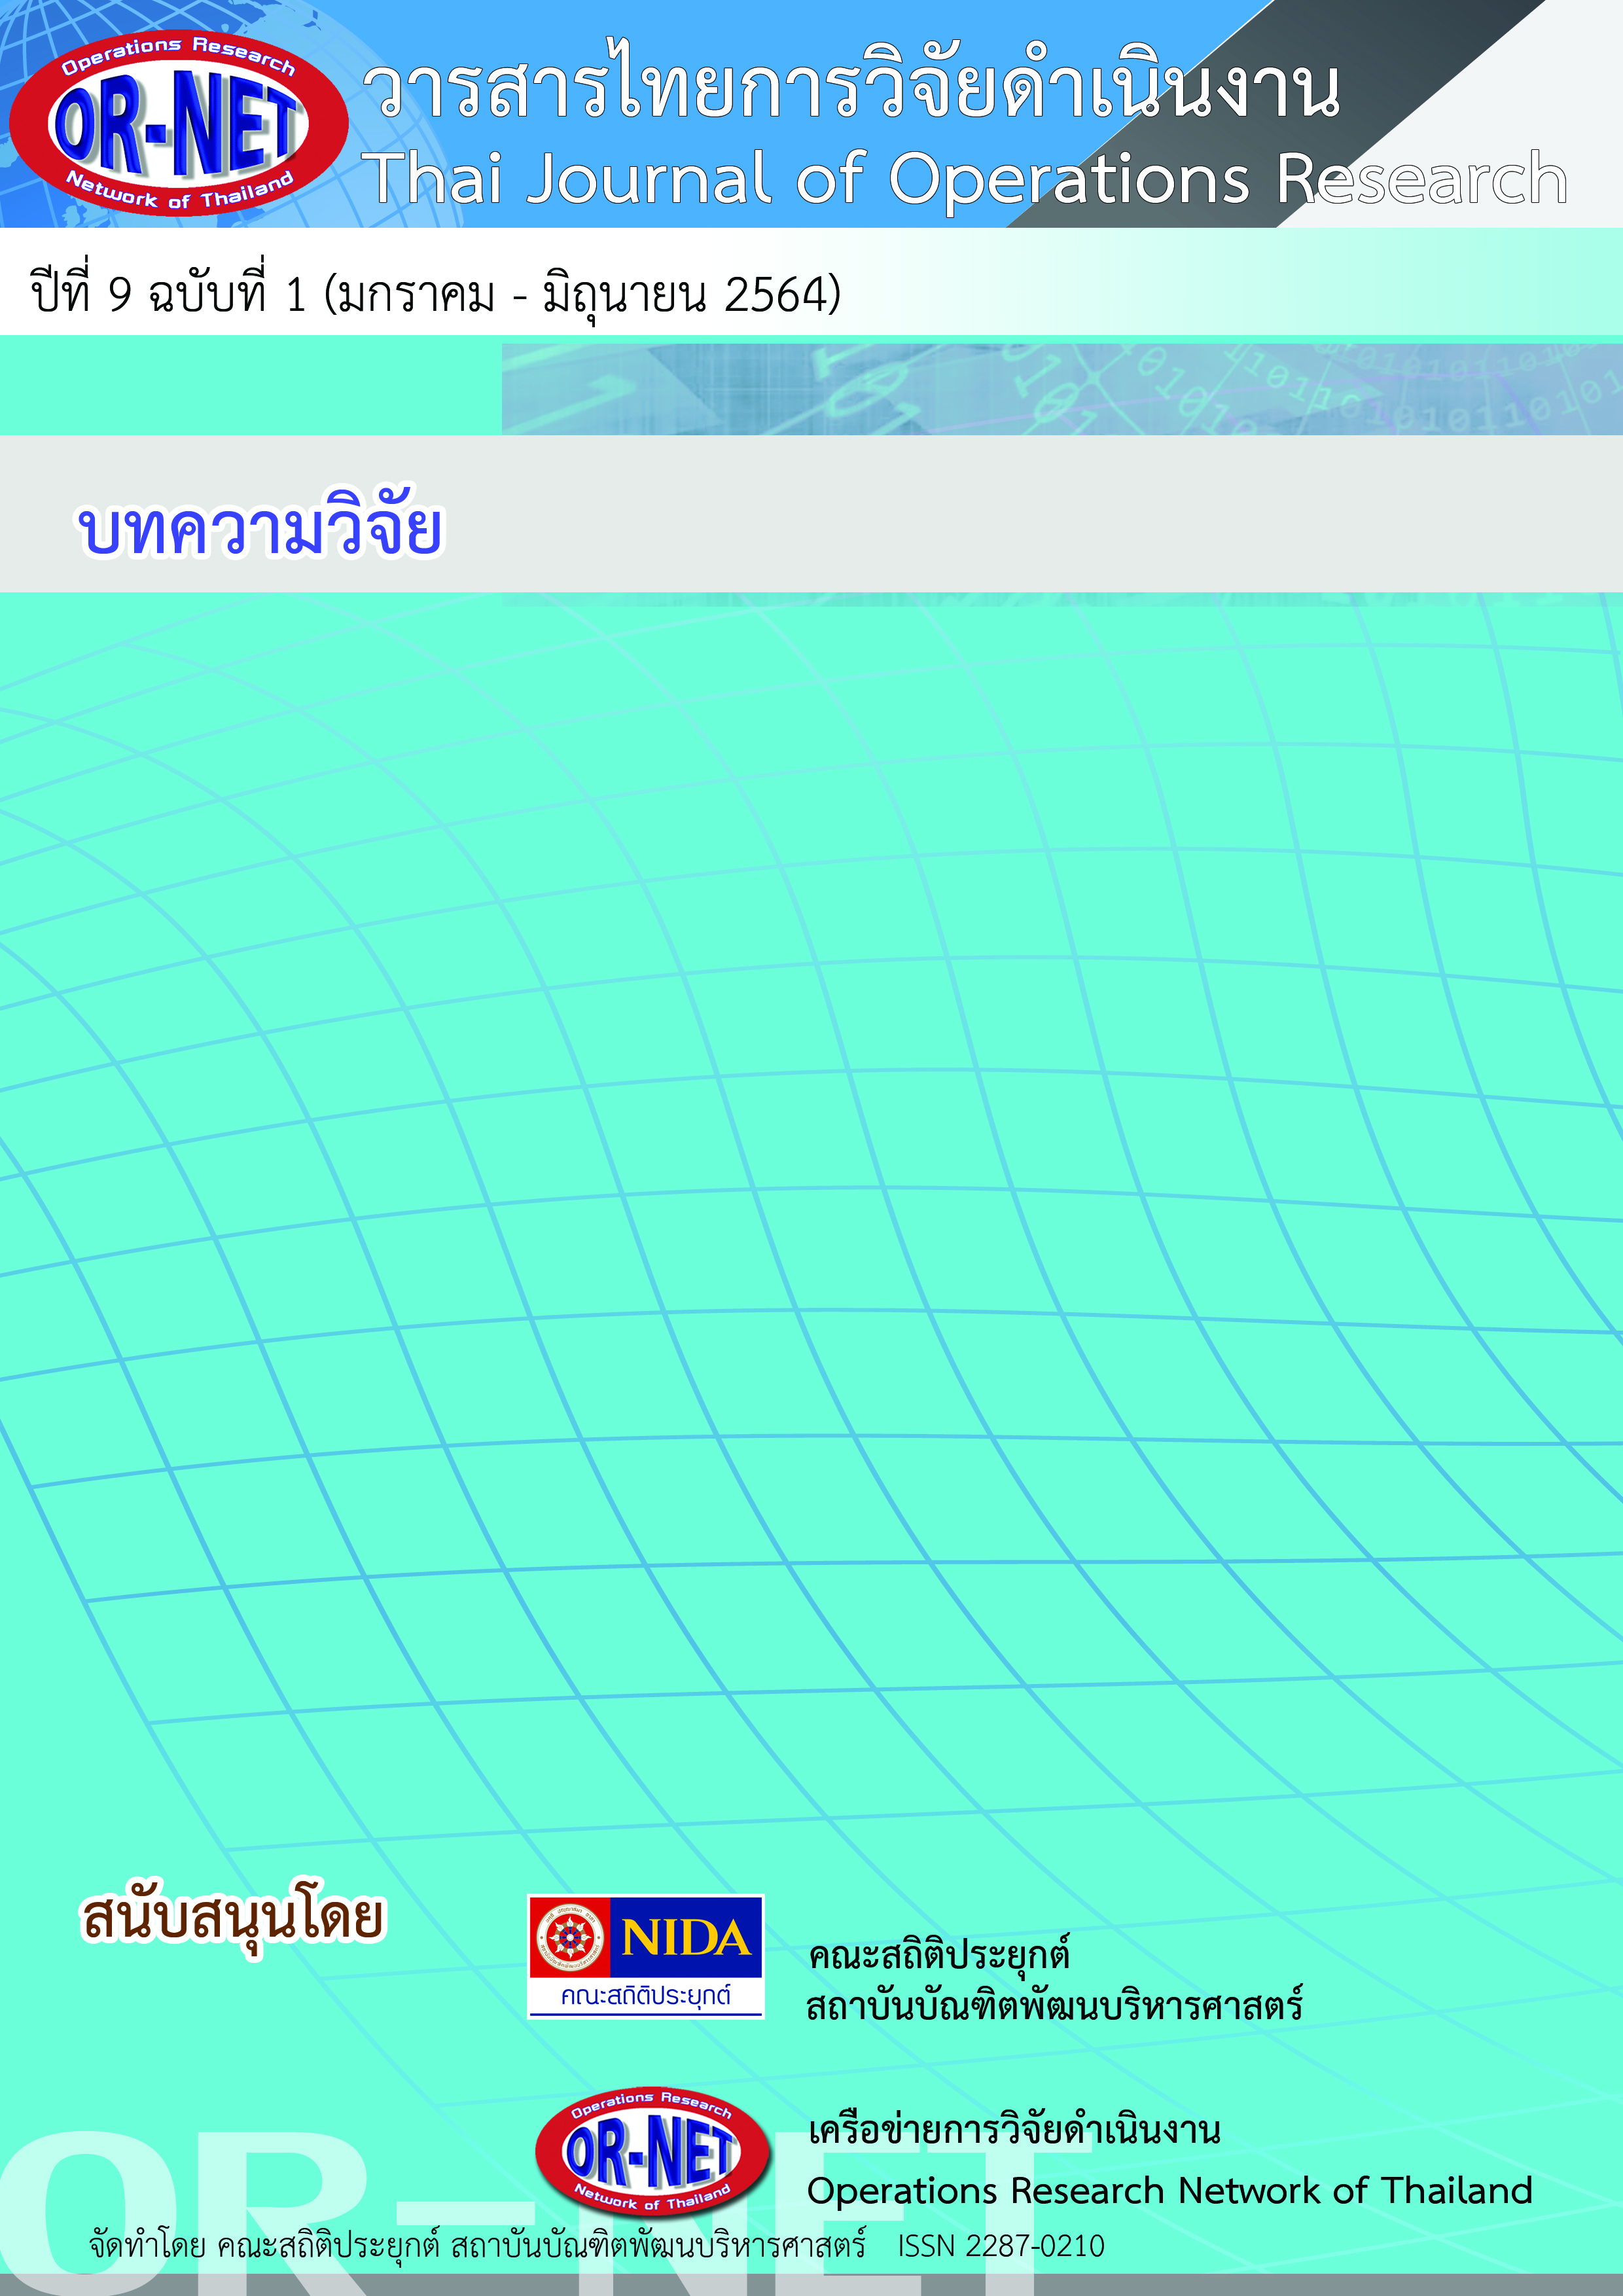 					View Vol. 9 No. 1 (2021): Thai Journal of Operations Research: TJOR Vol 9 No 1 (January - June 2021)
				